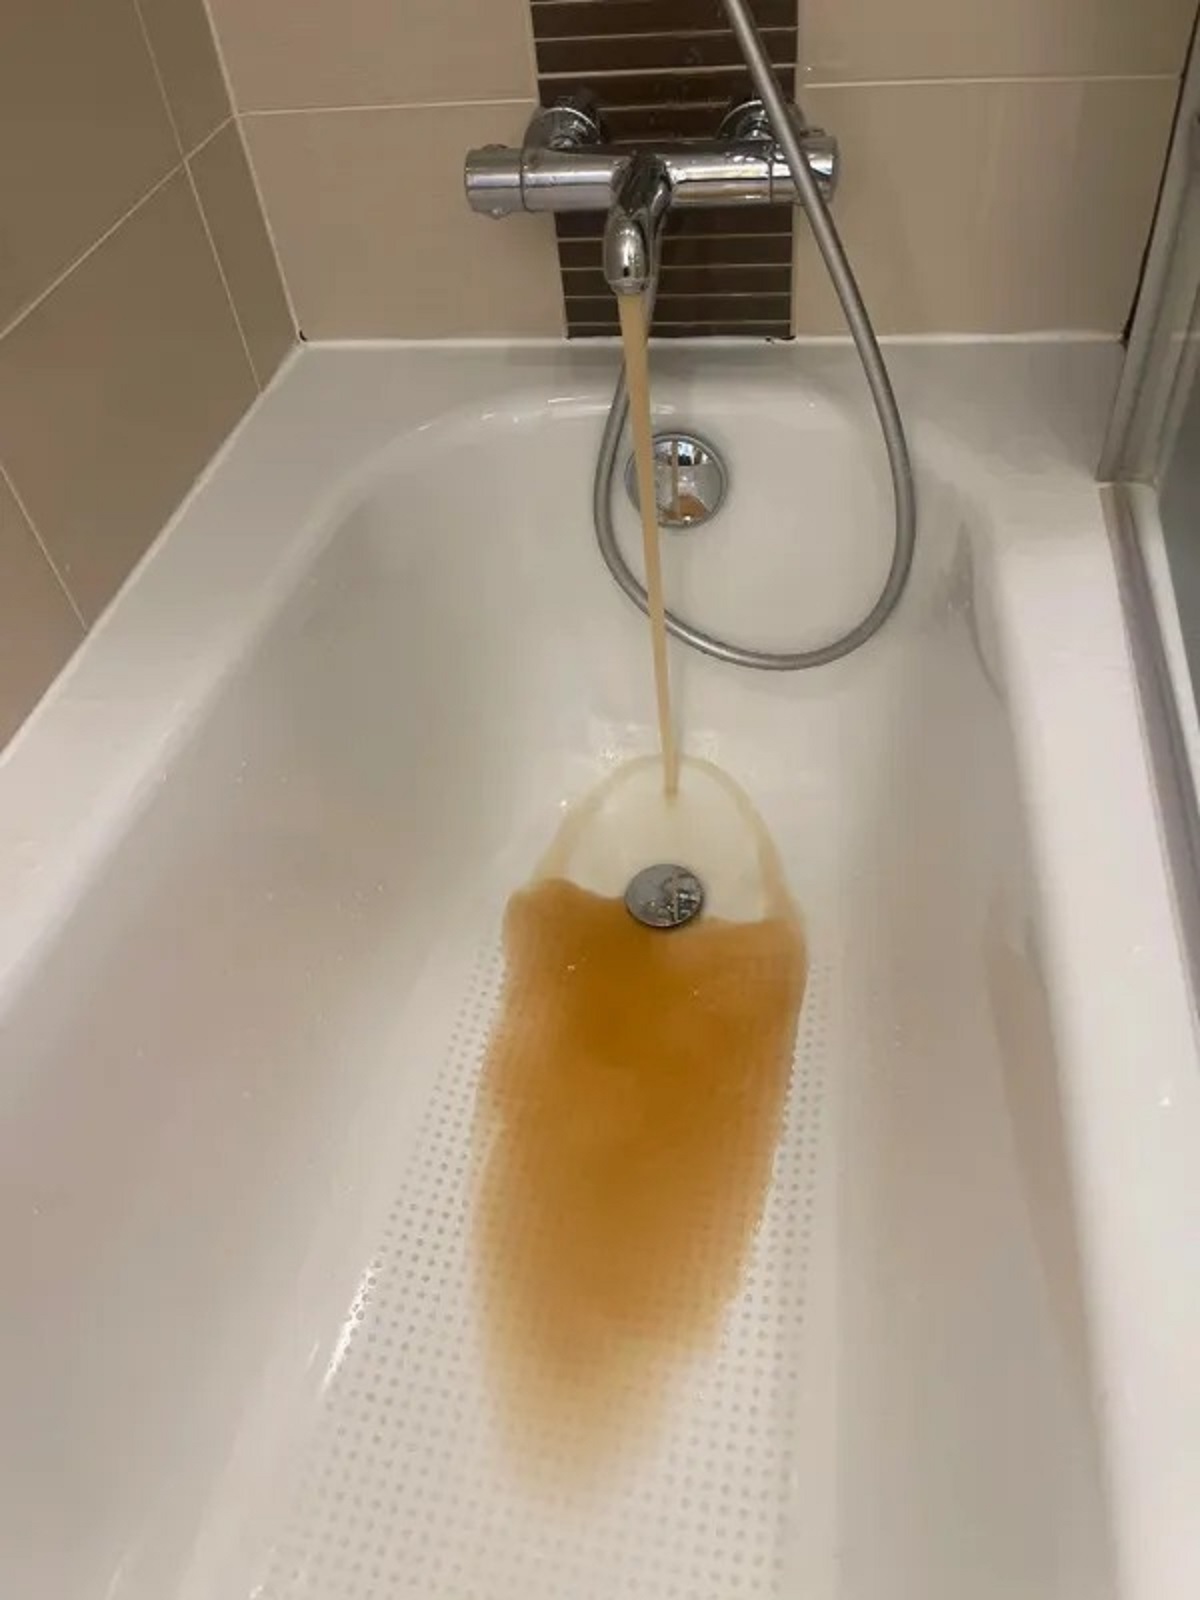 The running hot water from my $550/night Paris hotel room.